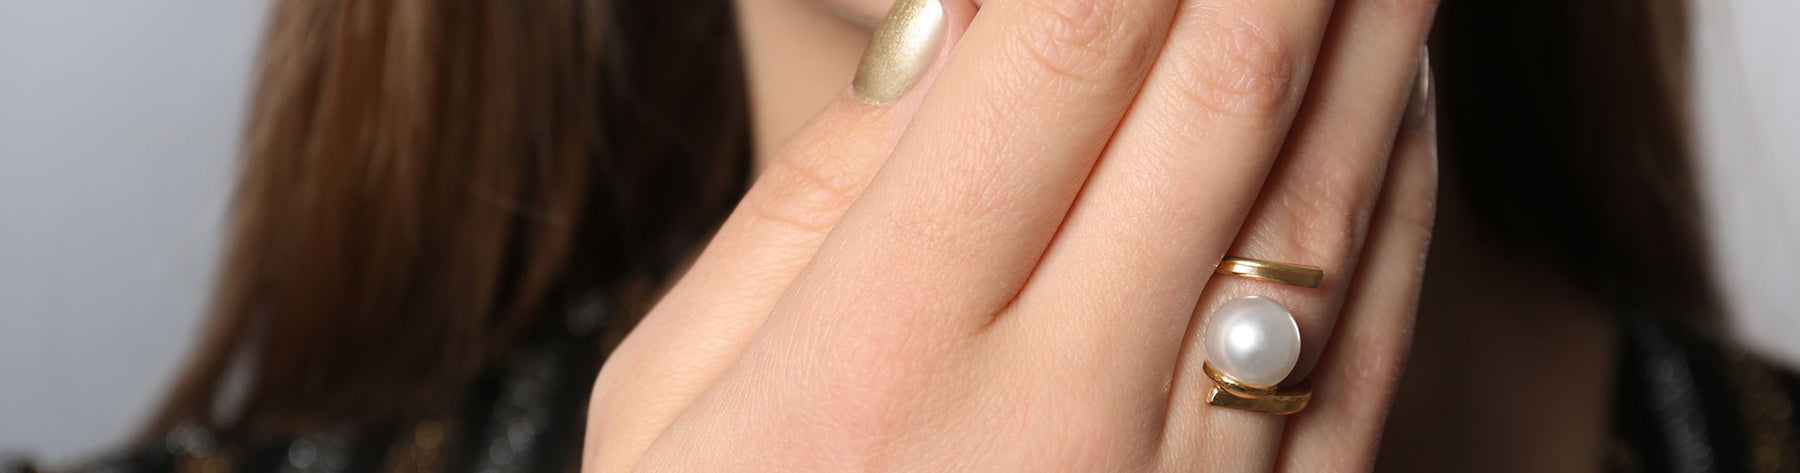 14 Ideas For Non-Traditional Engagement Rings